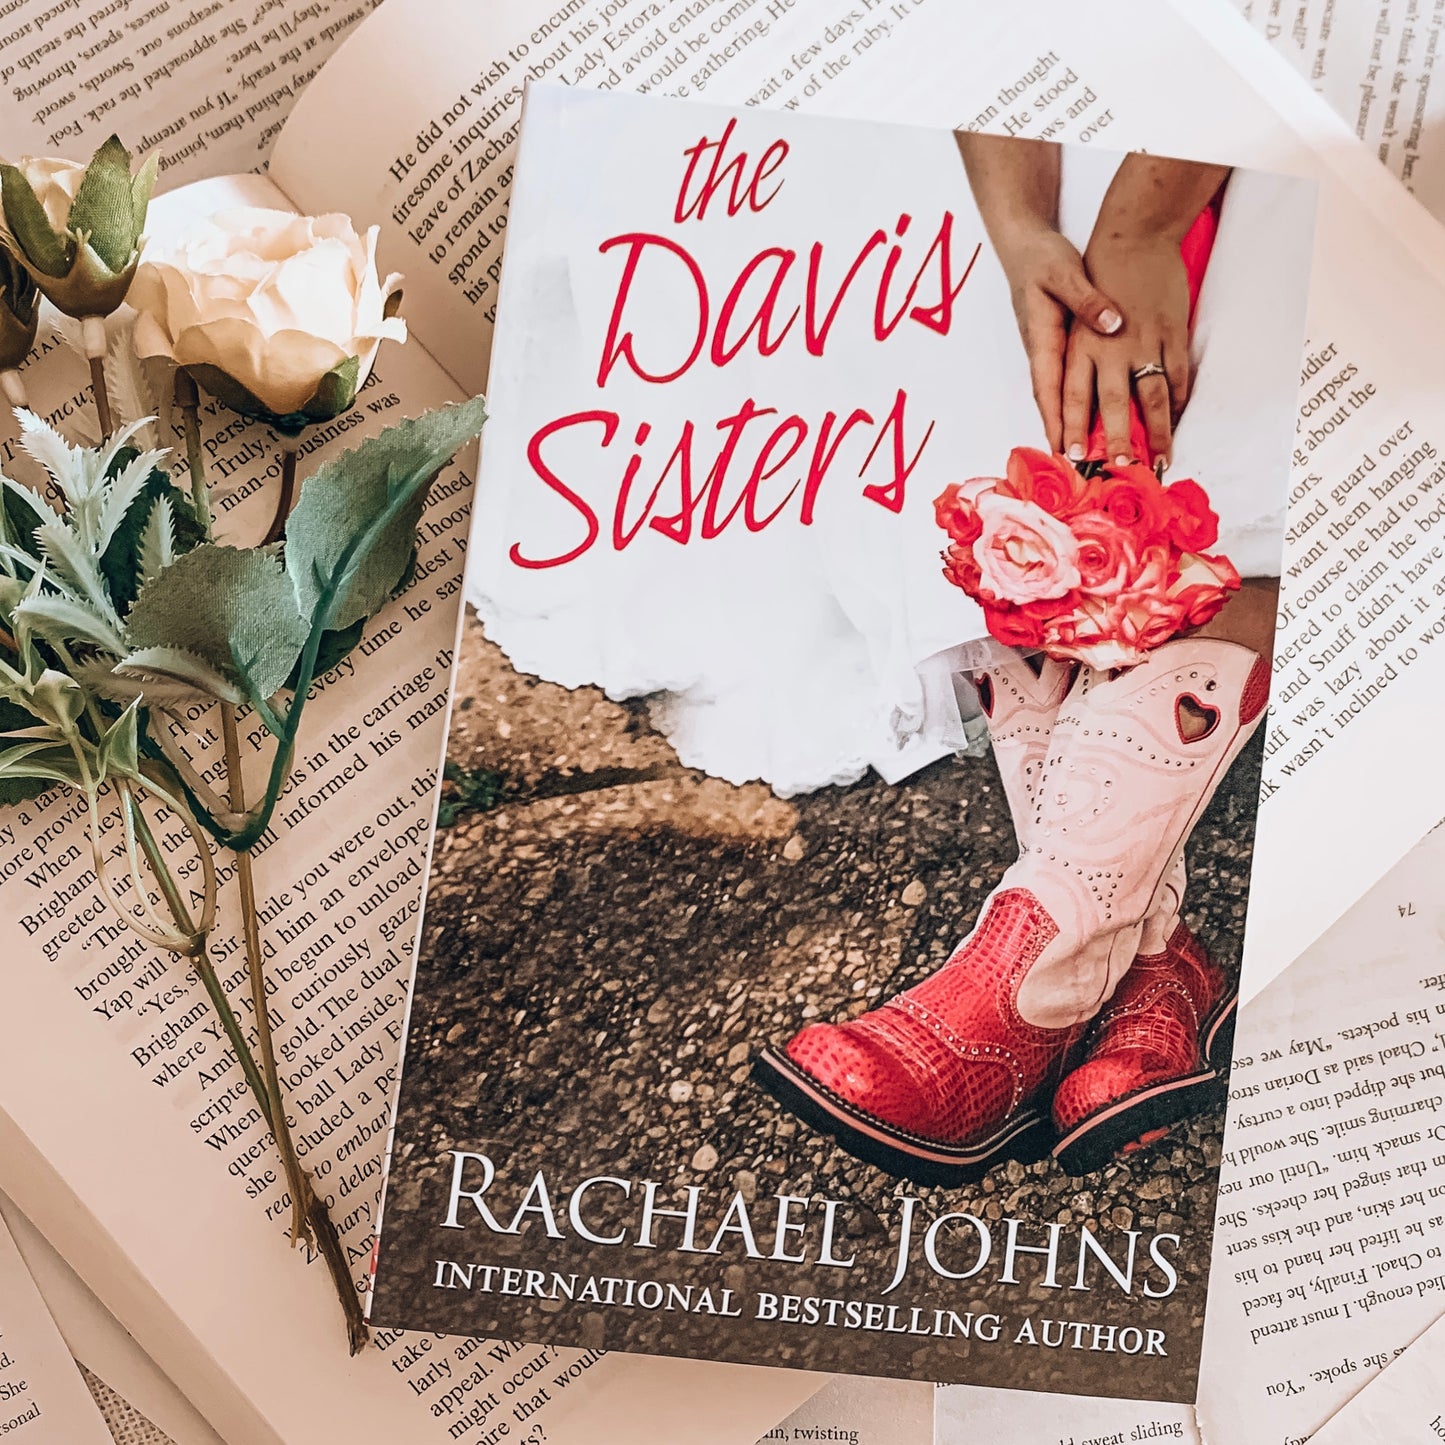 The Davis Sisters by Rachael Johns